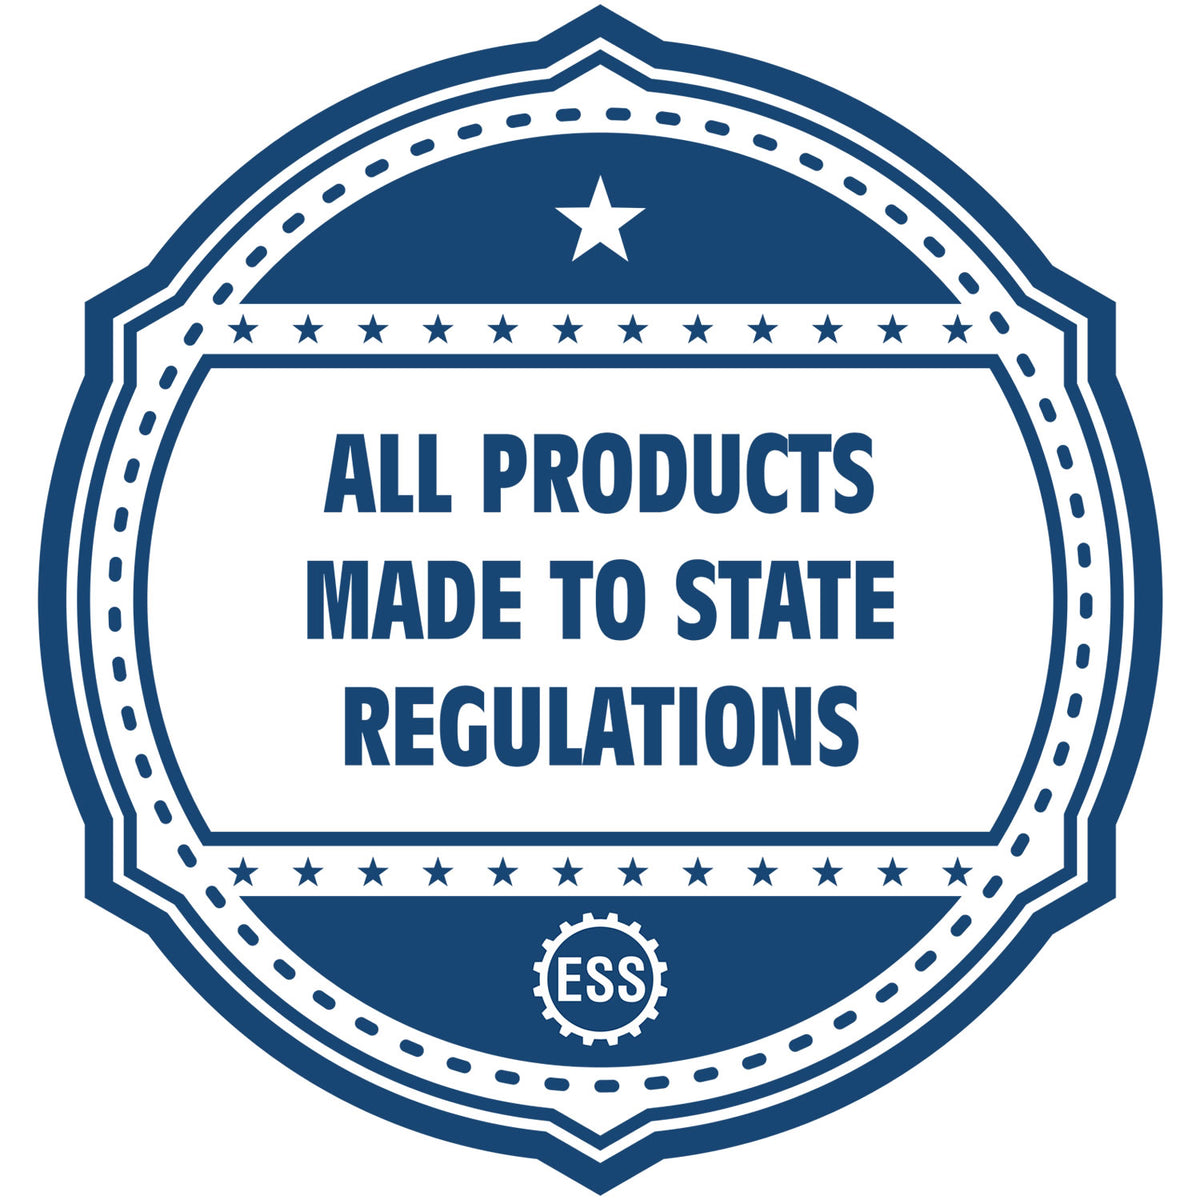 A blue icon or badge for the Texas Geologist Desk Seal showing that this product is made in compliance with state regulations.